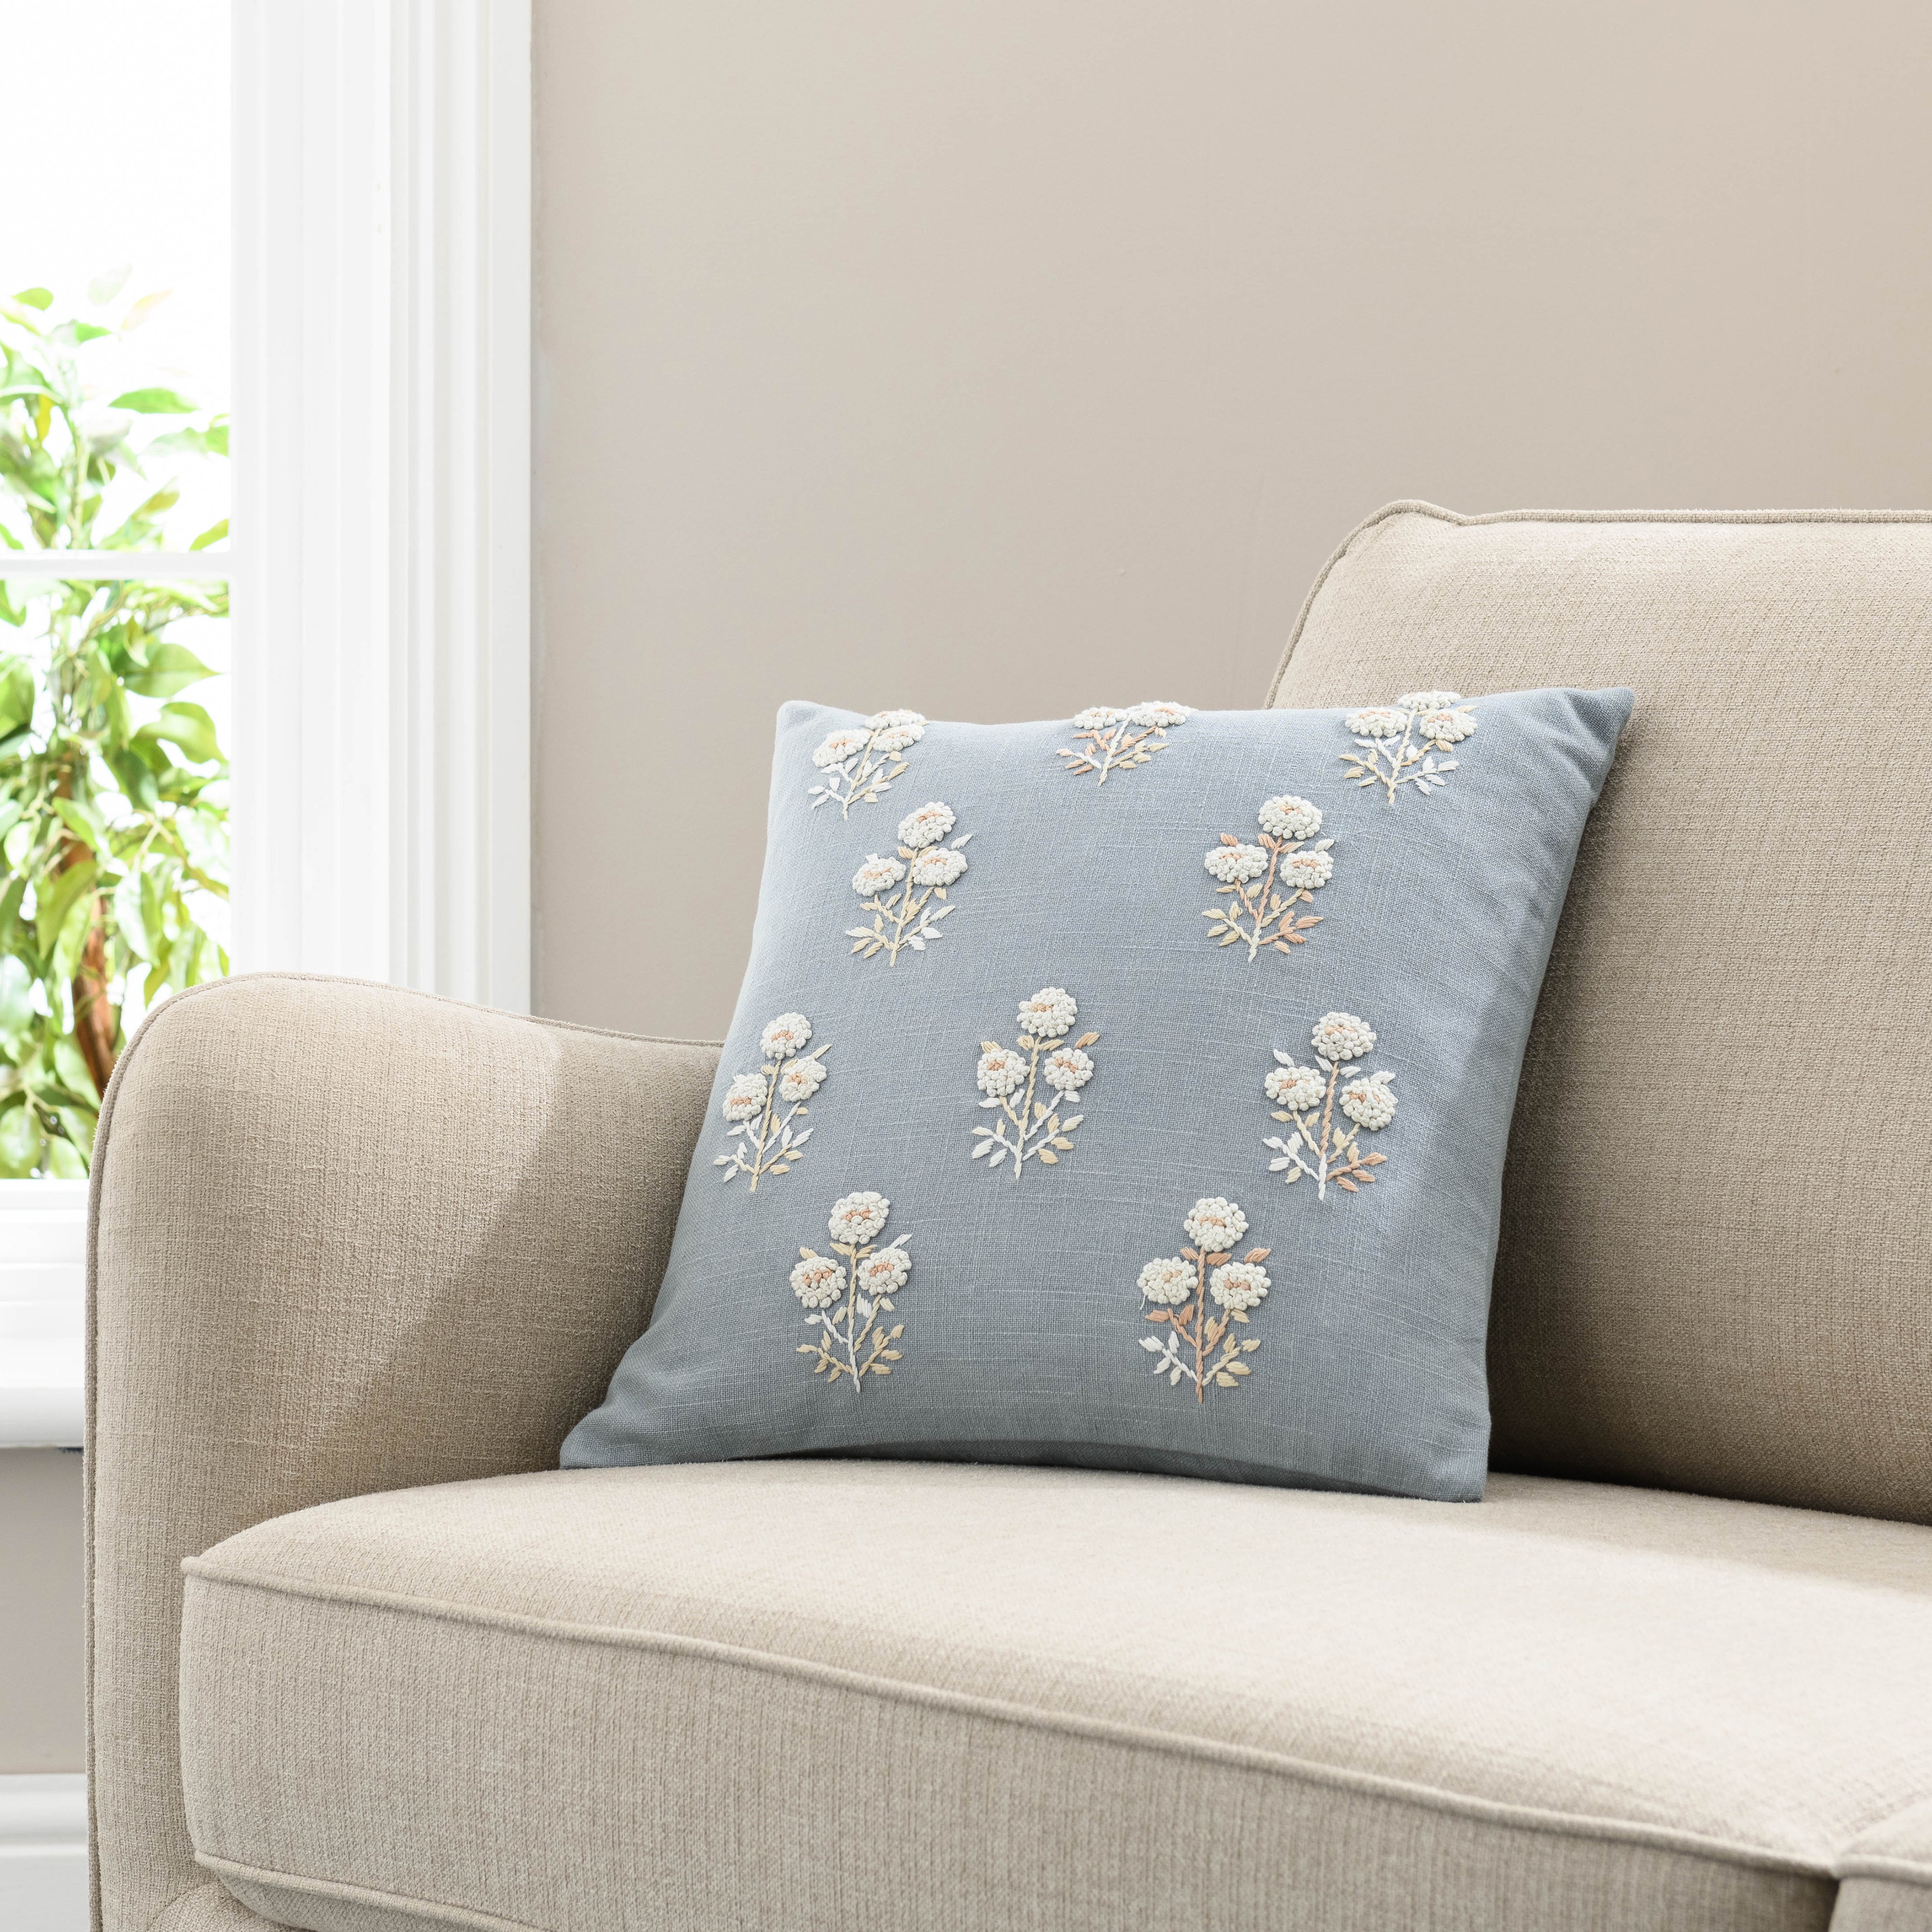 French Knot Floral Cushion Cover